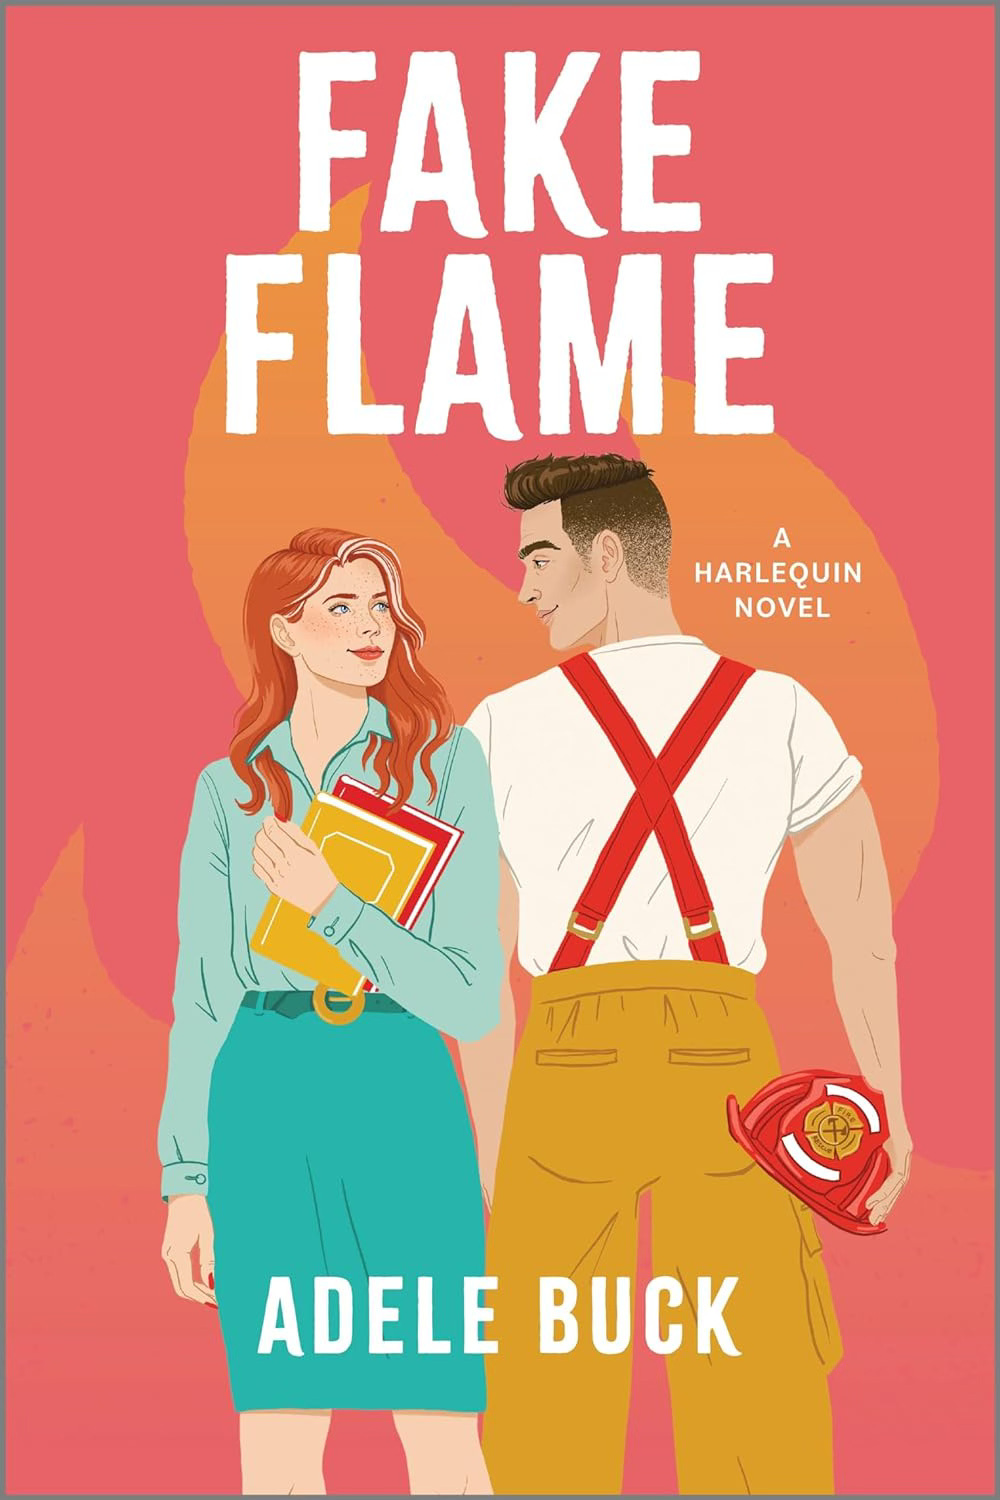 Cover art for FAKE FLAME by Adele Buck features cartoon character art featuring a red-haired heroine holding books and a large, jacked firefighter holding his helmet as they look over their shoulders at each other. The background is a steamy orange.